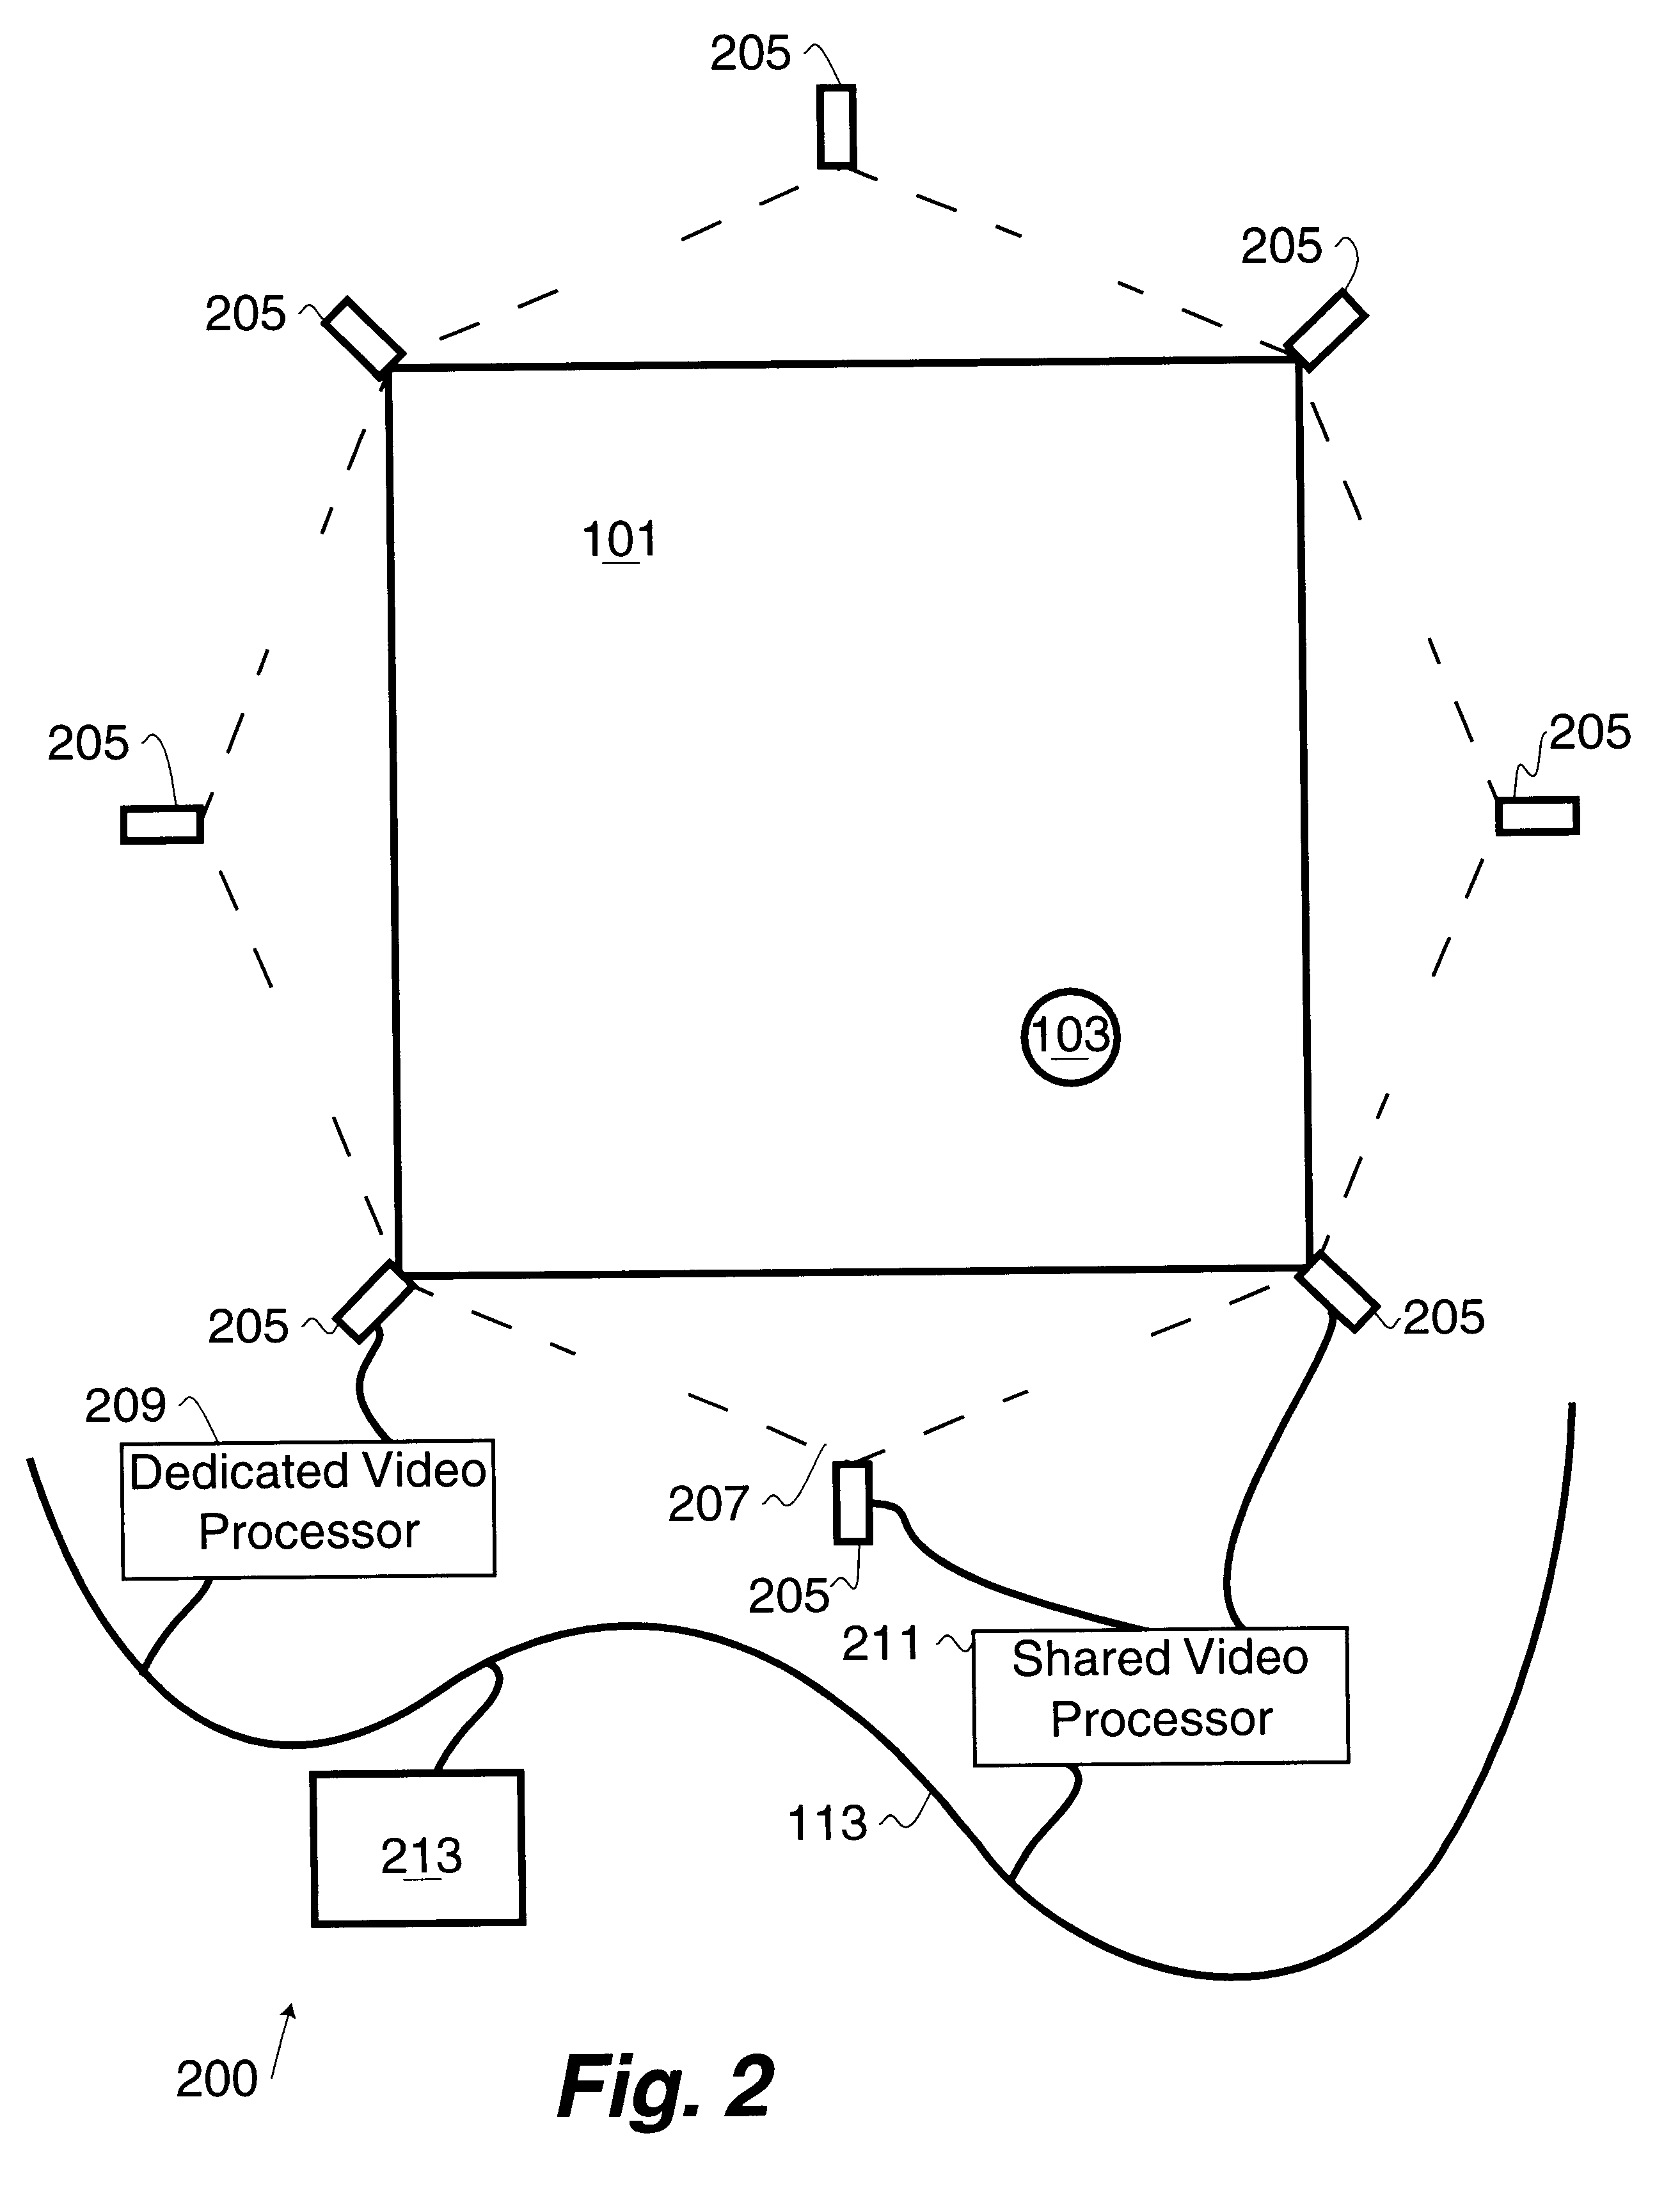 Method and system for generation of multiple viewpoints into a scene viewed by motionless cameras and for presentation of a view path